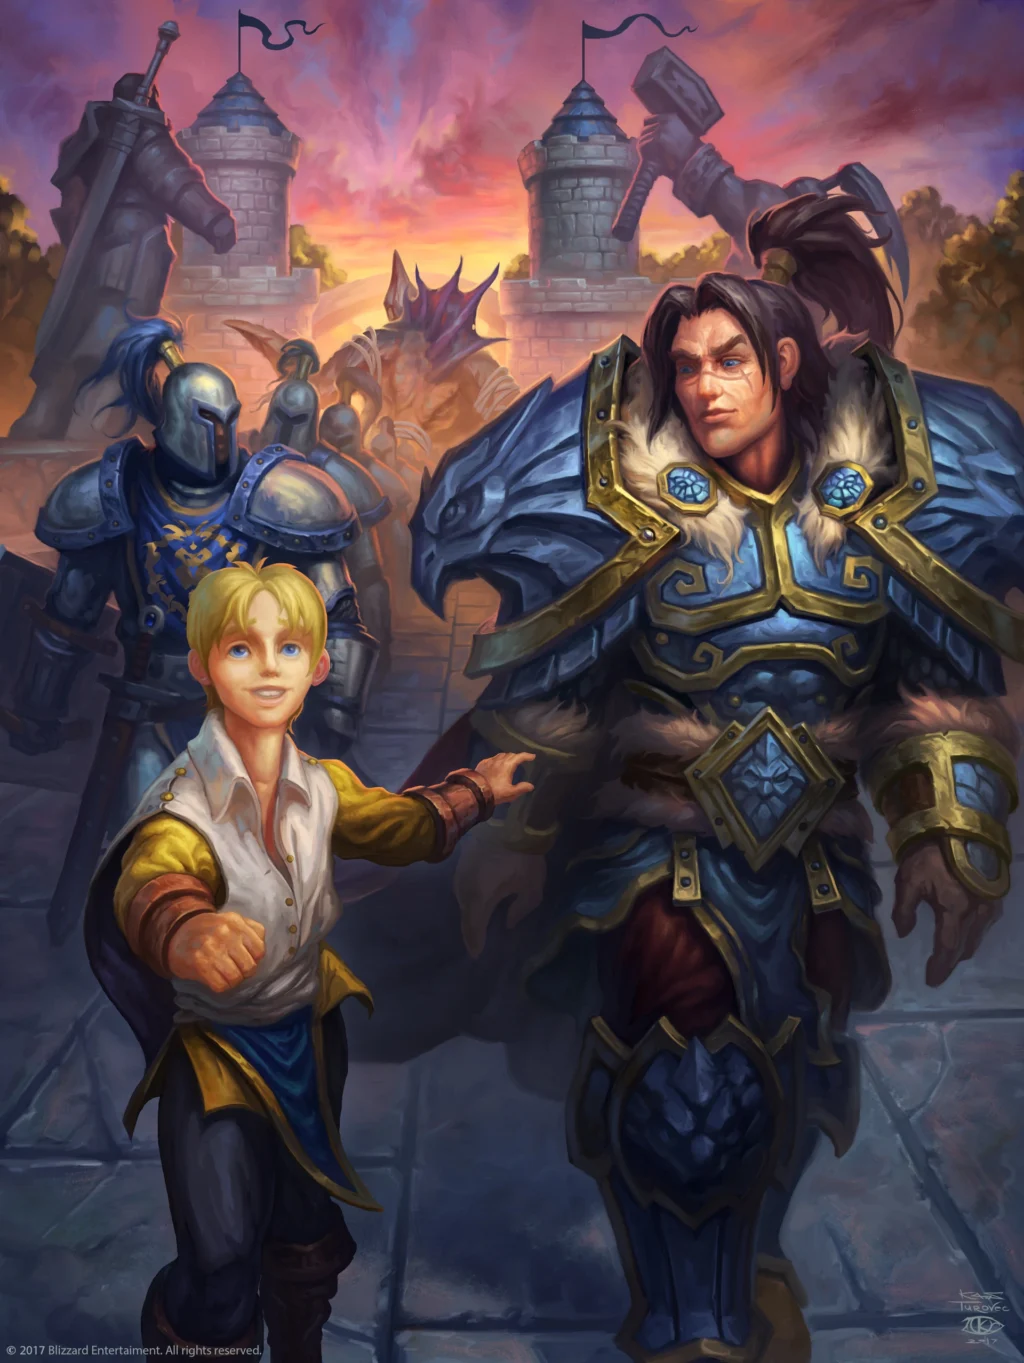 Anduin and Varian walking together in the streets. Image titled "Anduin_Varian_Chronicle"